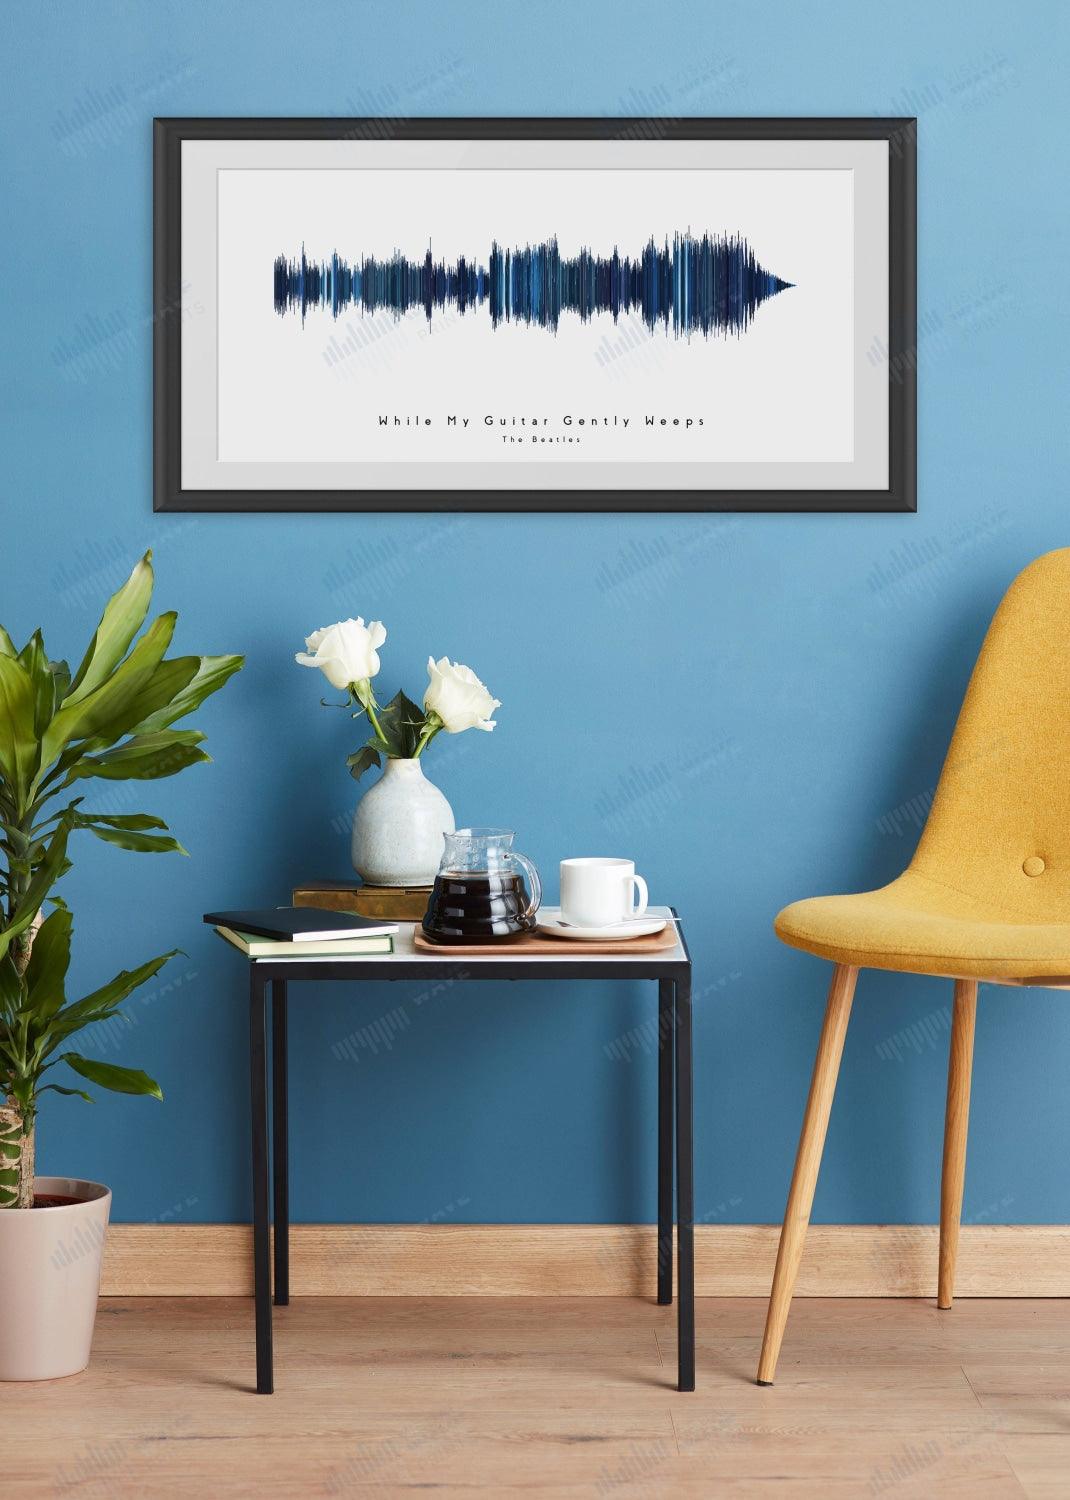 While My Guitar Gently Weeps by The Beatles - Visual Wave Prints